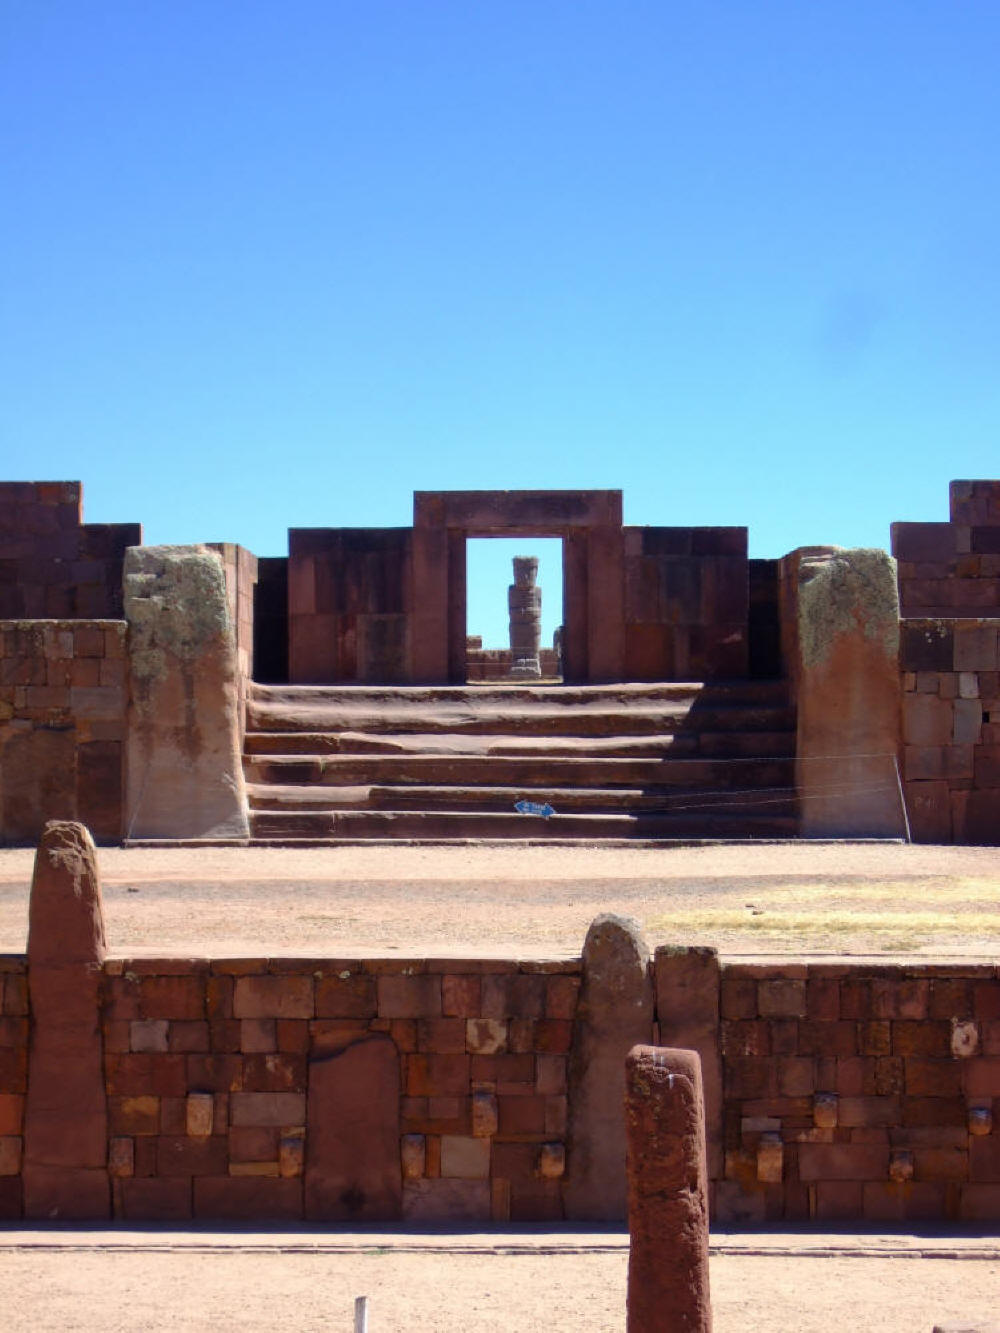 At Tiwanaku they even show you where to stand.